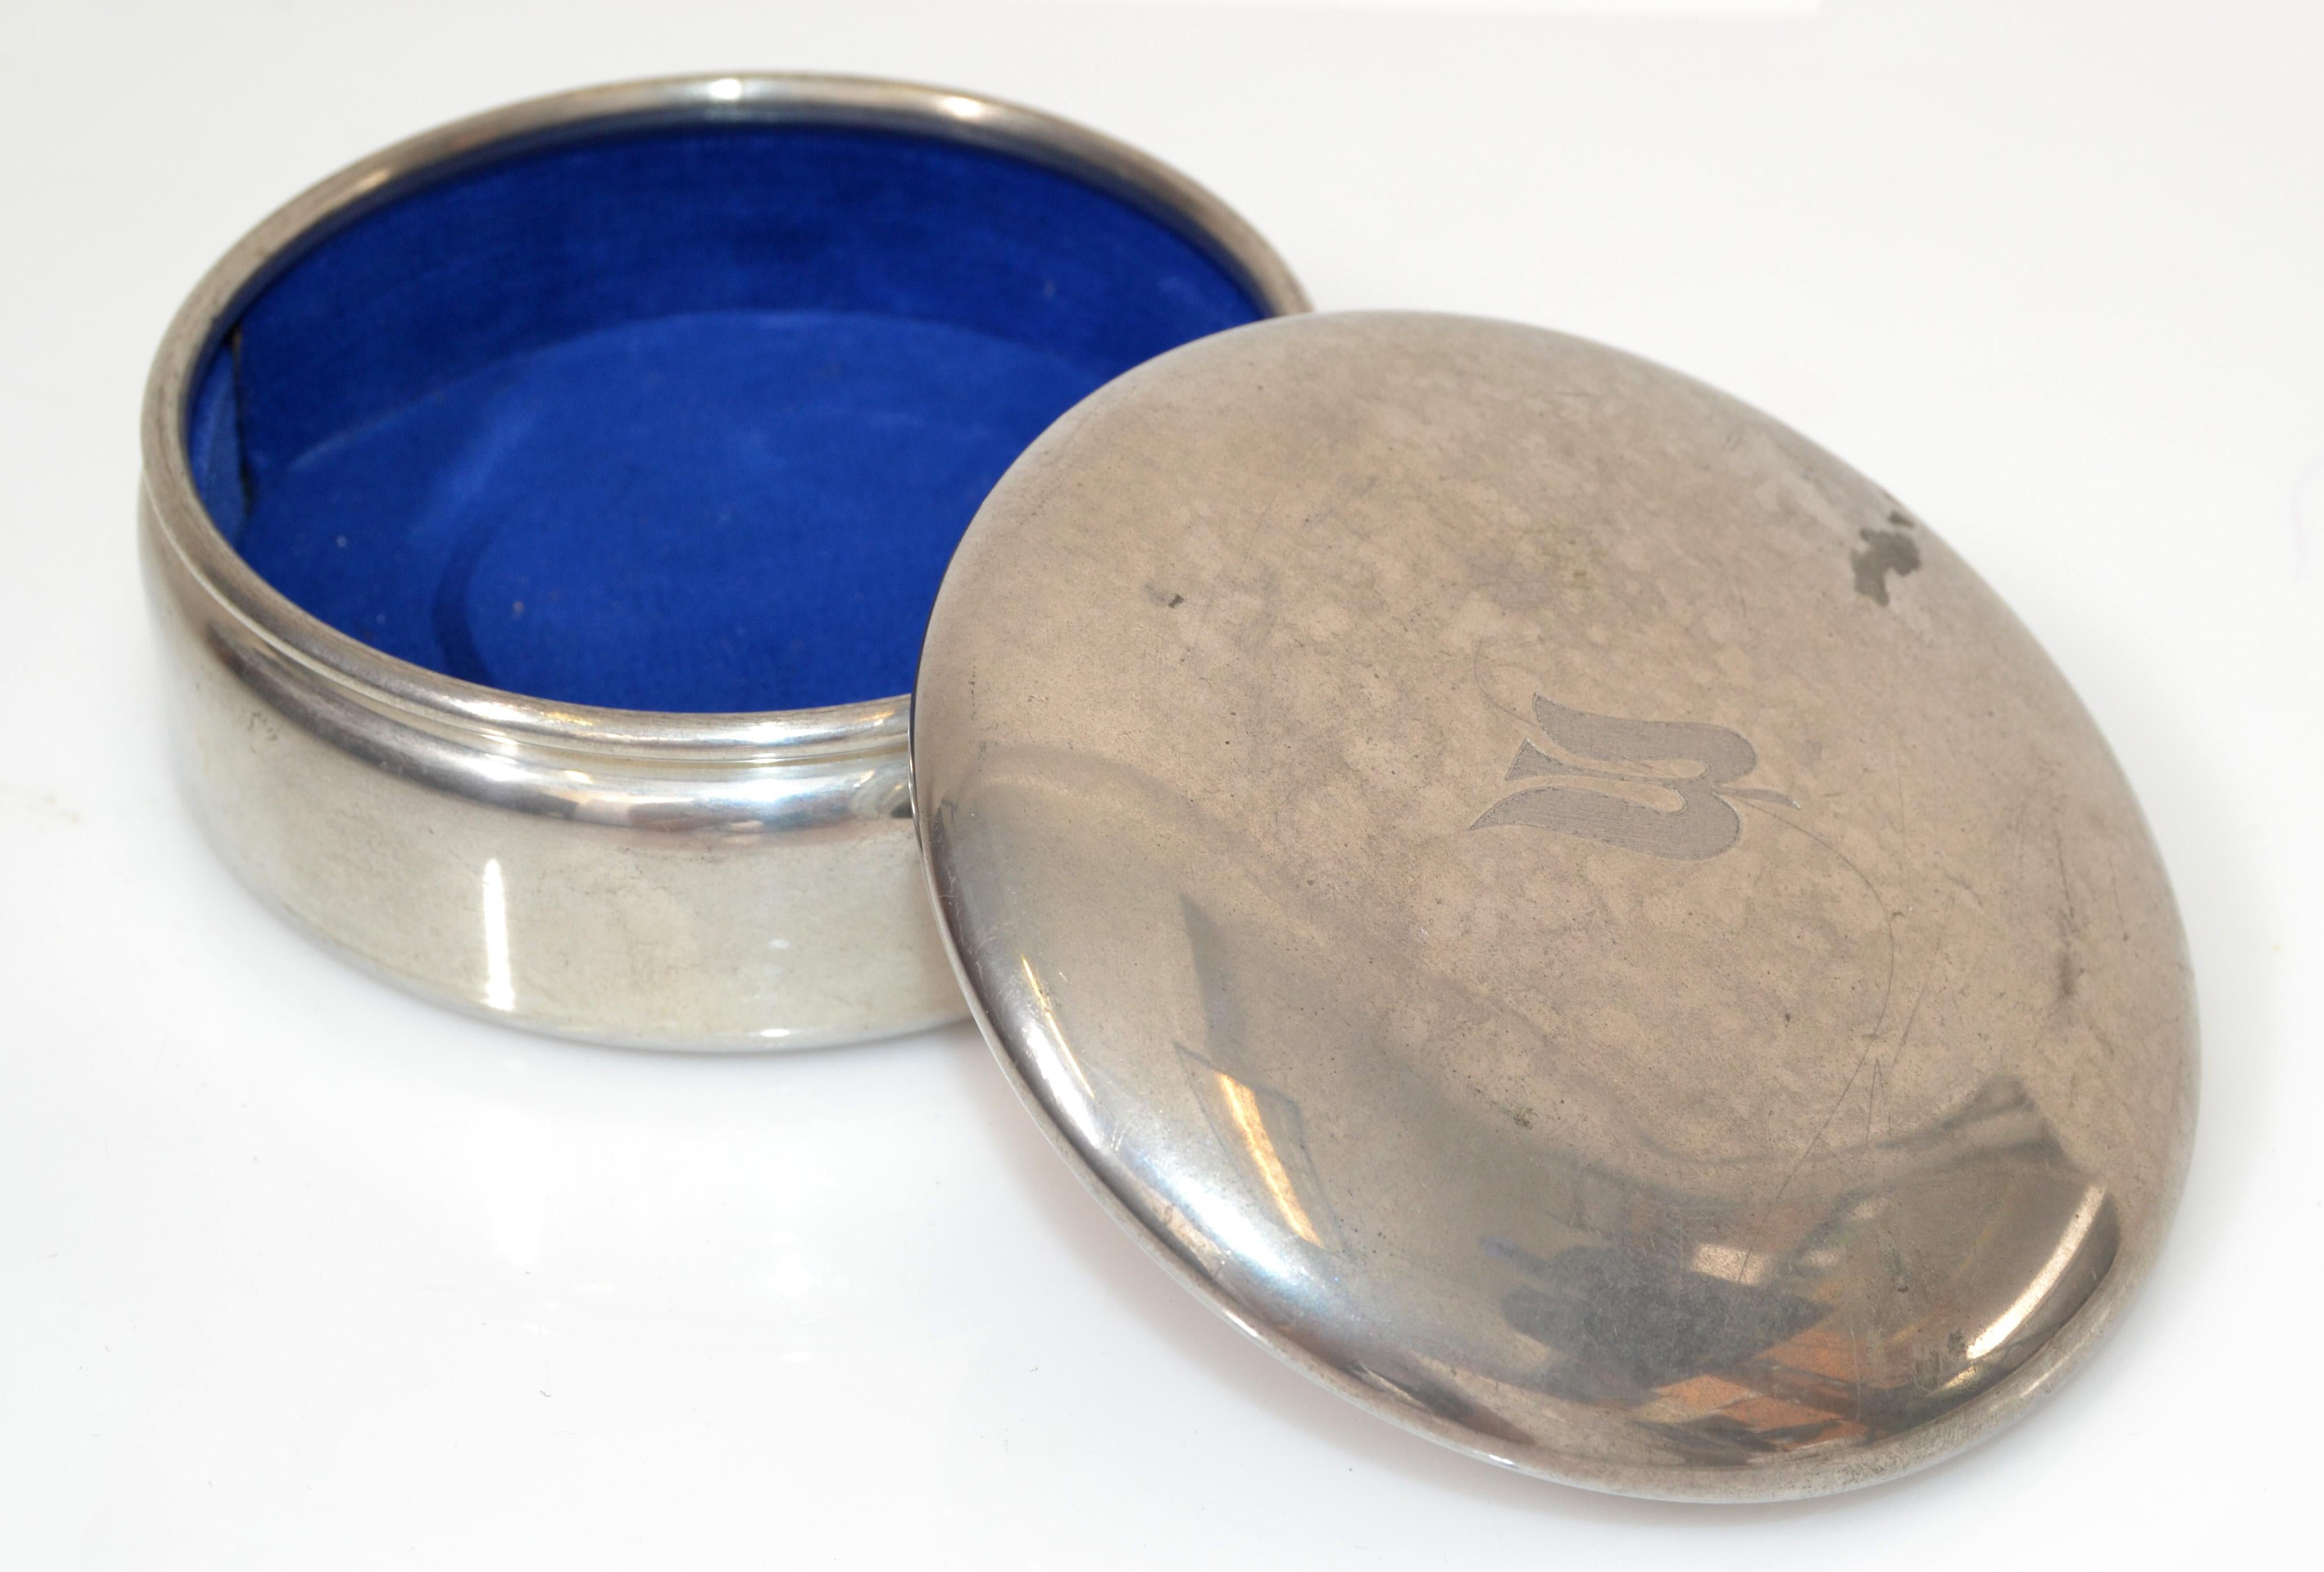 Empire Pewter 701 Covered Trinket Ring Dish Decorative Box Blue Velvet Inlaid 89 In Good Condition For Sale In Miami, FL